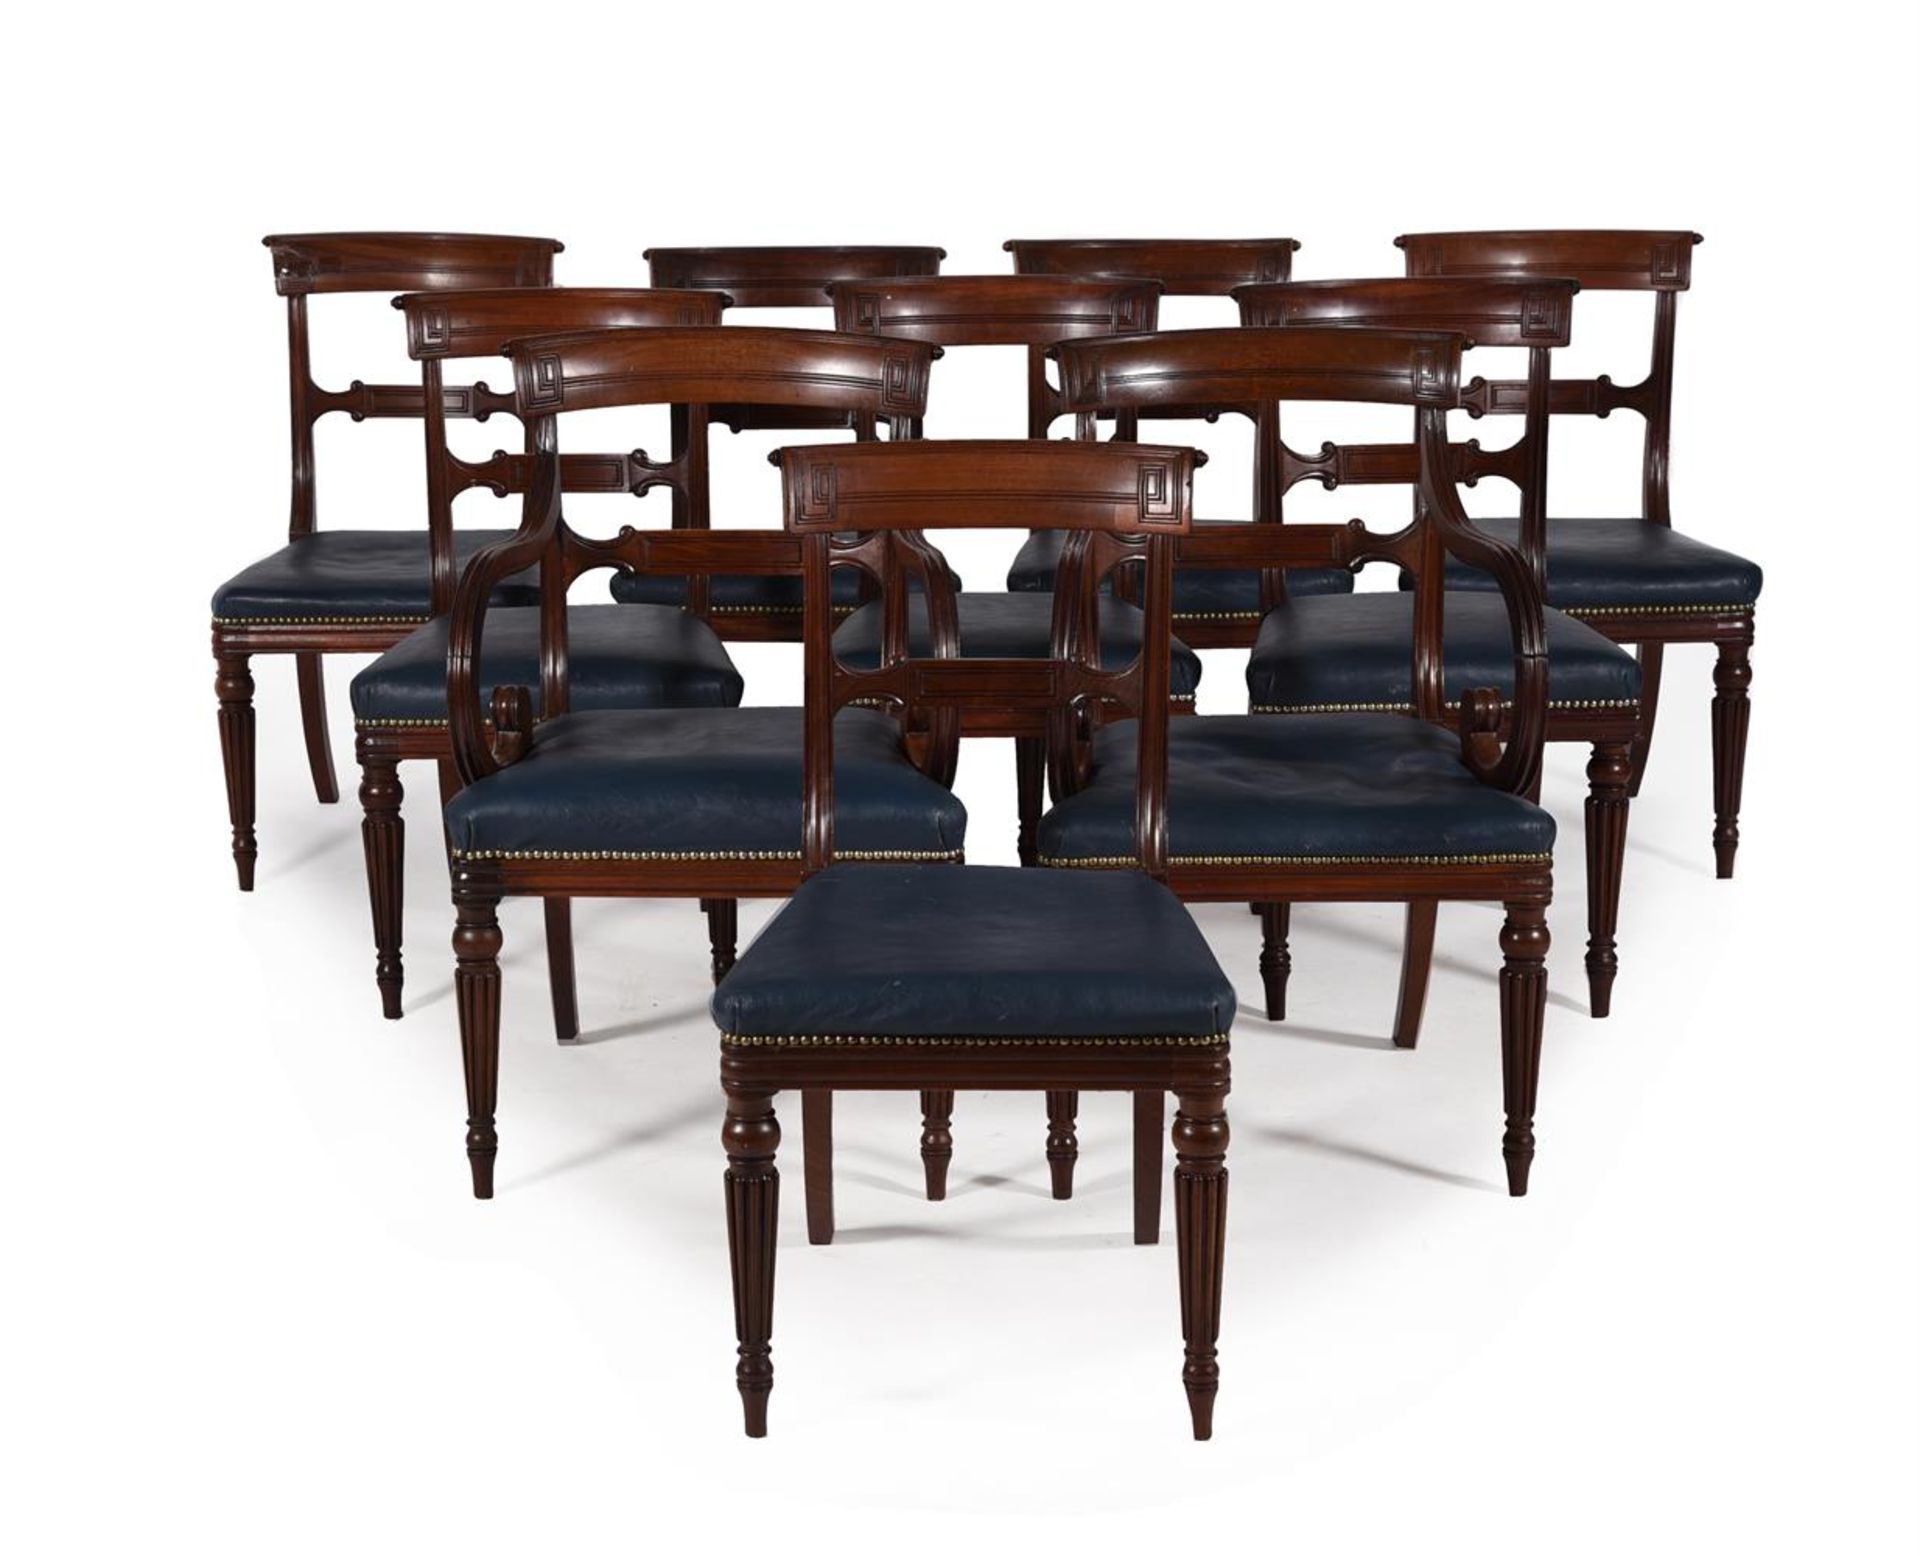 A SET OF TEN GEORGE IV MAHOGANY DINING CHAIRS, ATTRIBUTED TO GILLOWS, CIRCA 1825